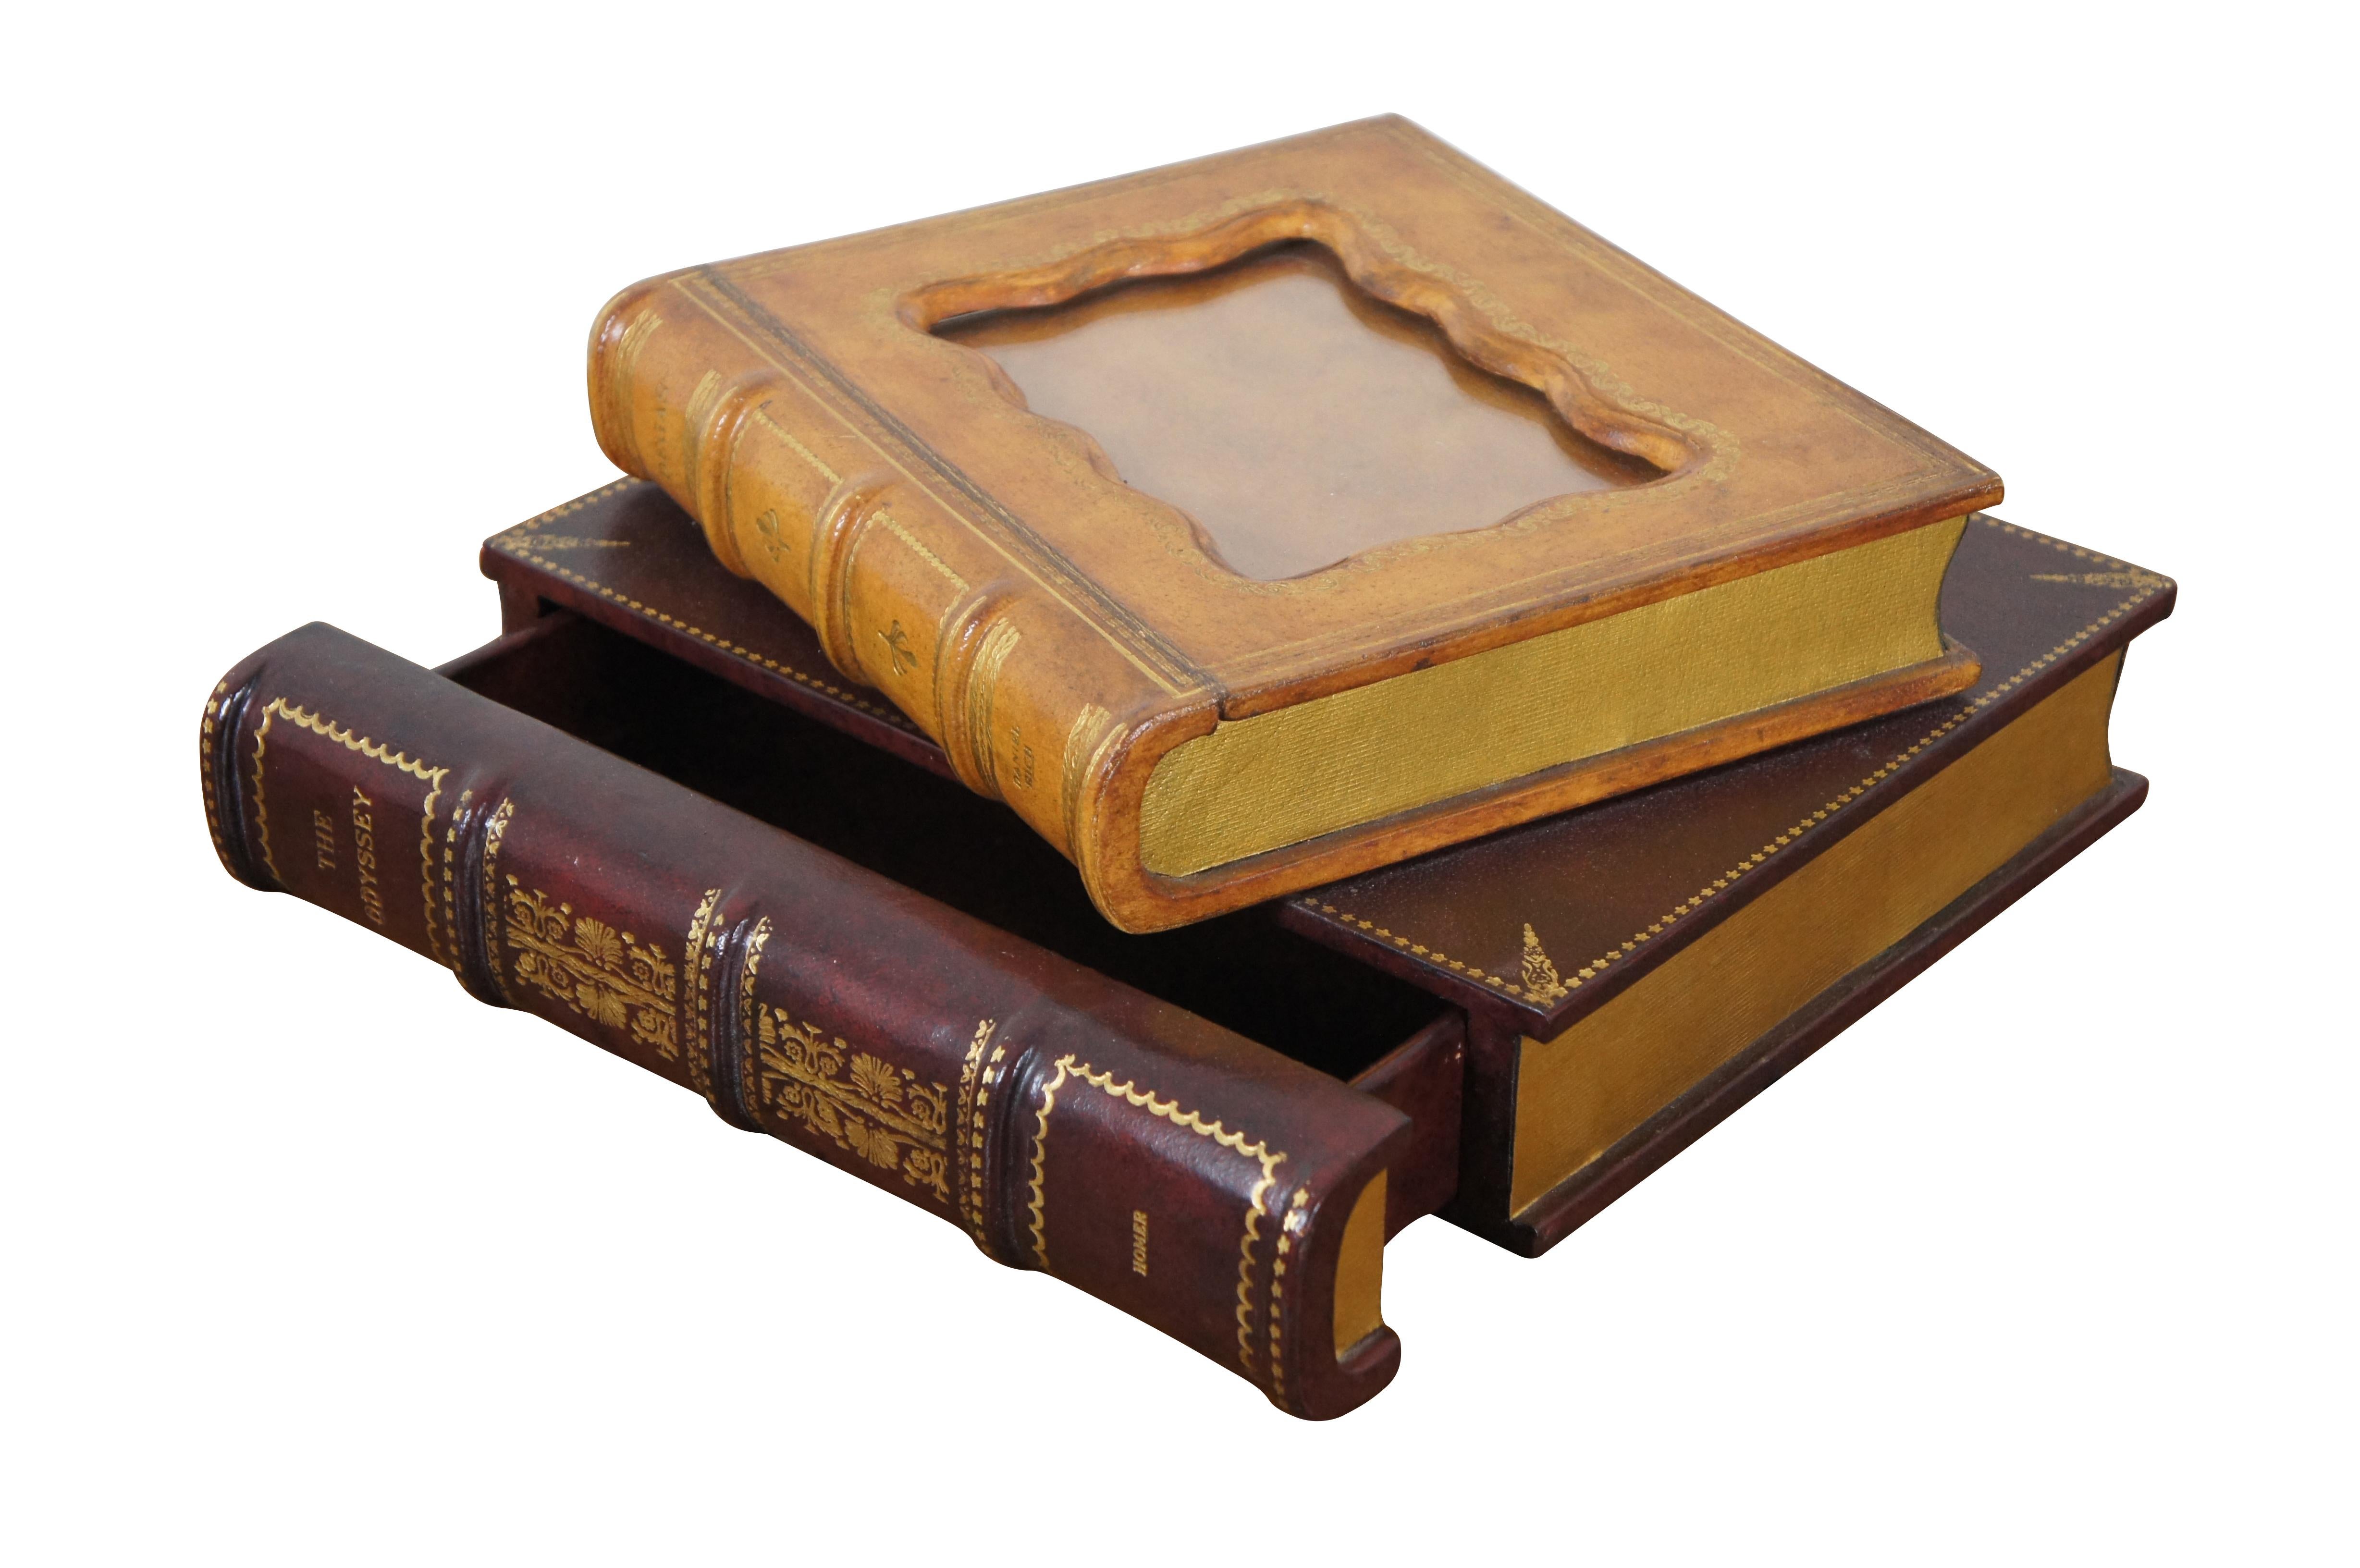 Vintage Maitland Smith trinket / keepsake / jewelry box / casket in the shape of two stacked leather bound books (Degas and The Odyssey) with gilded pages. The top one flips open and is set with a scalloped edge picture frame. The spine of the